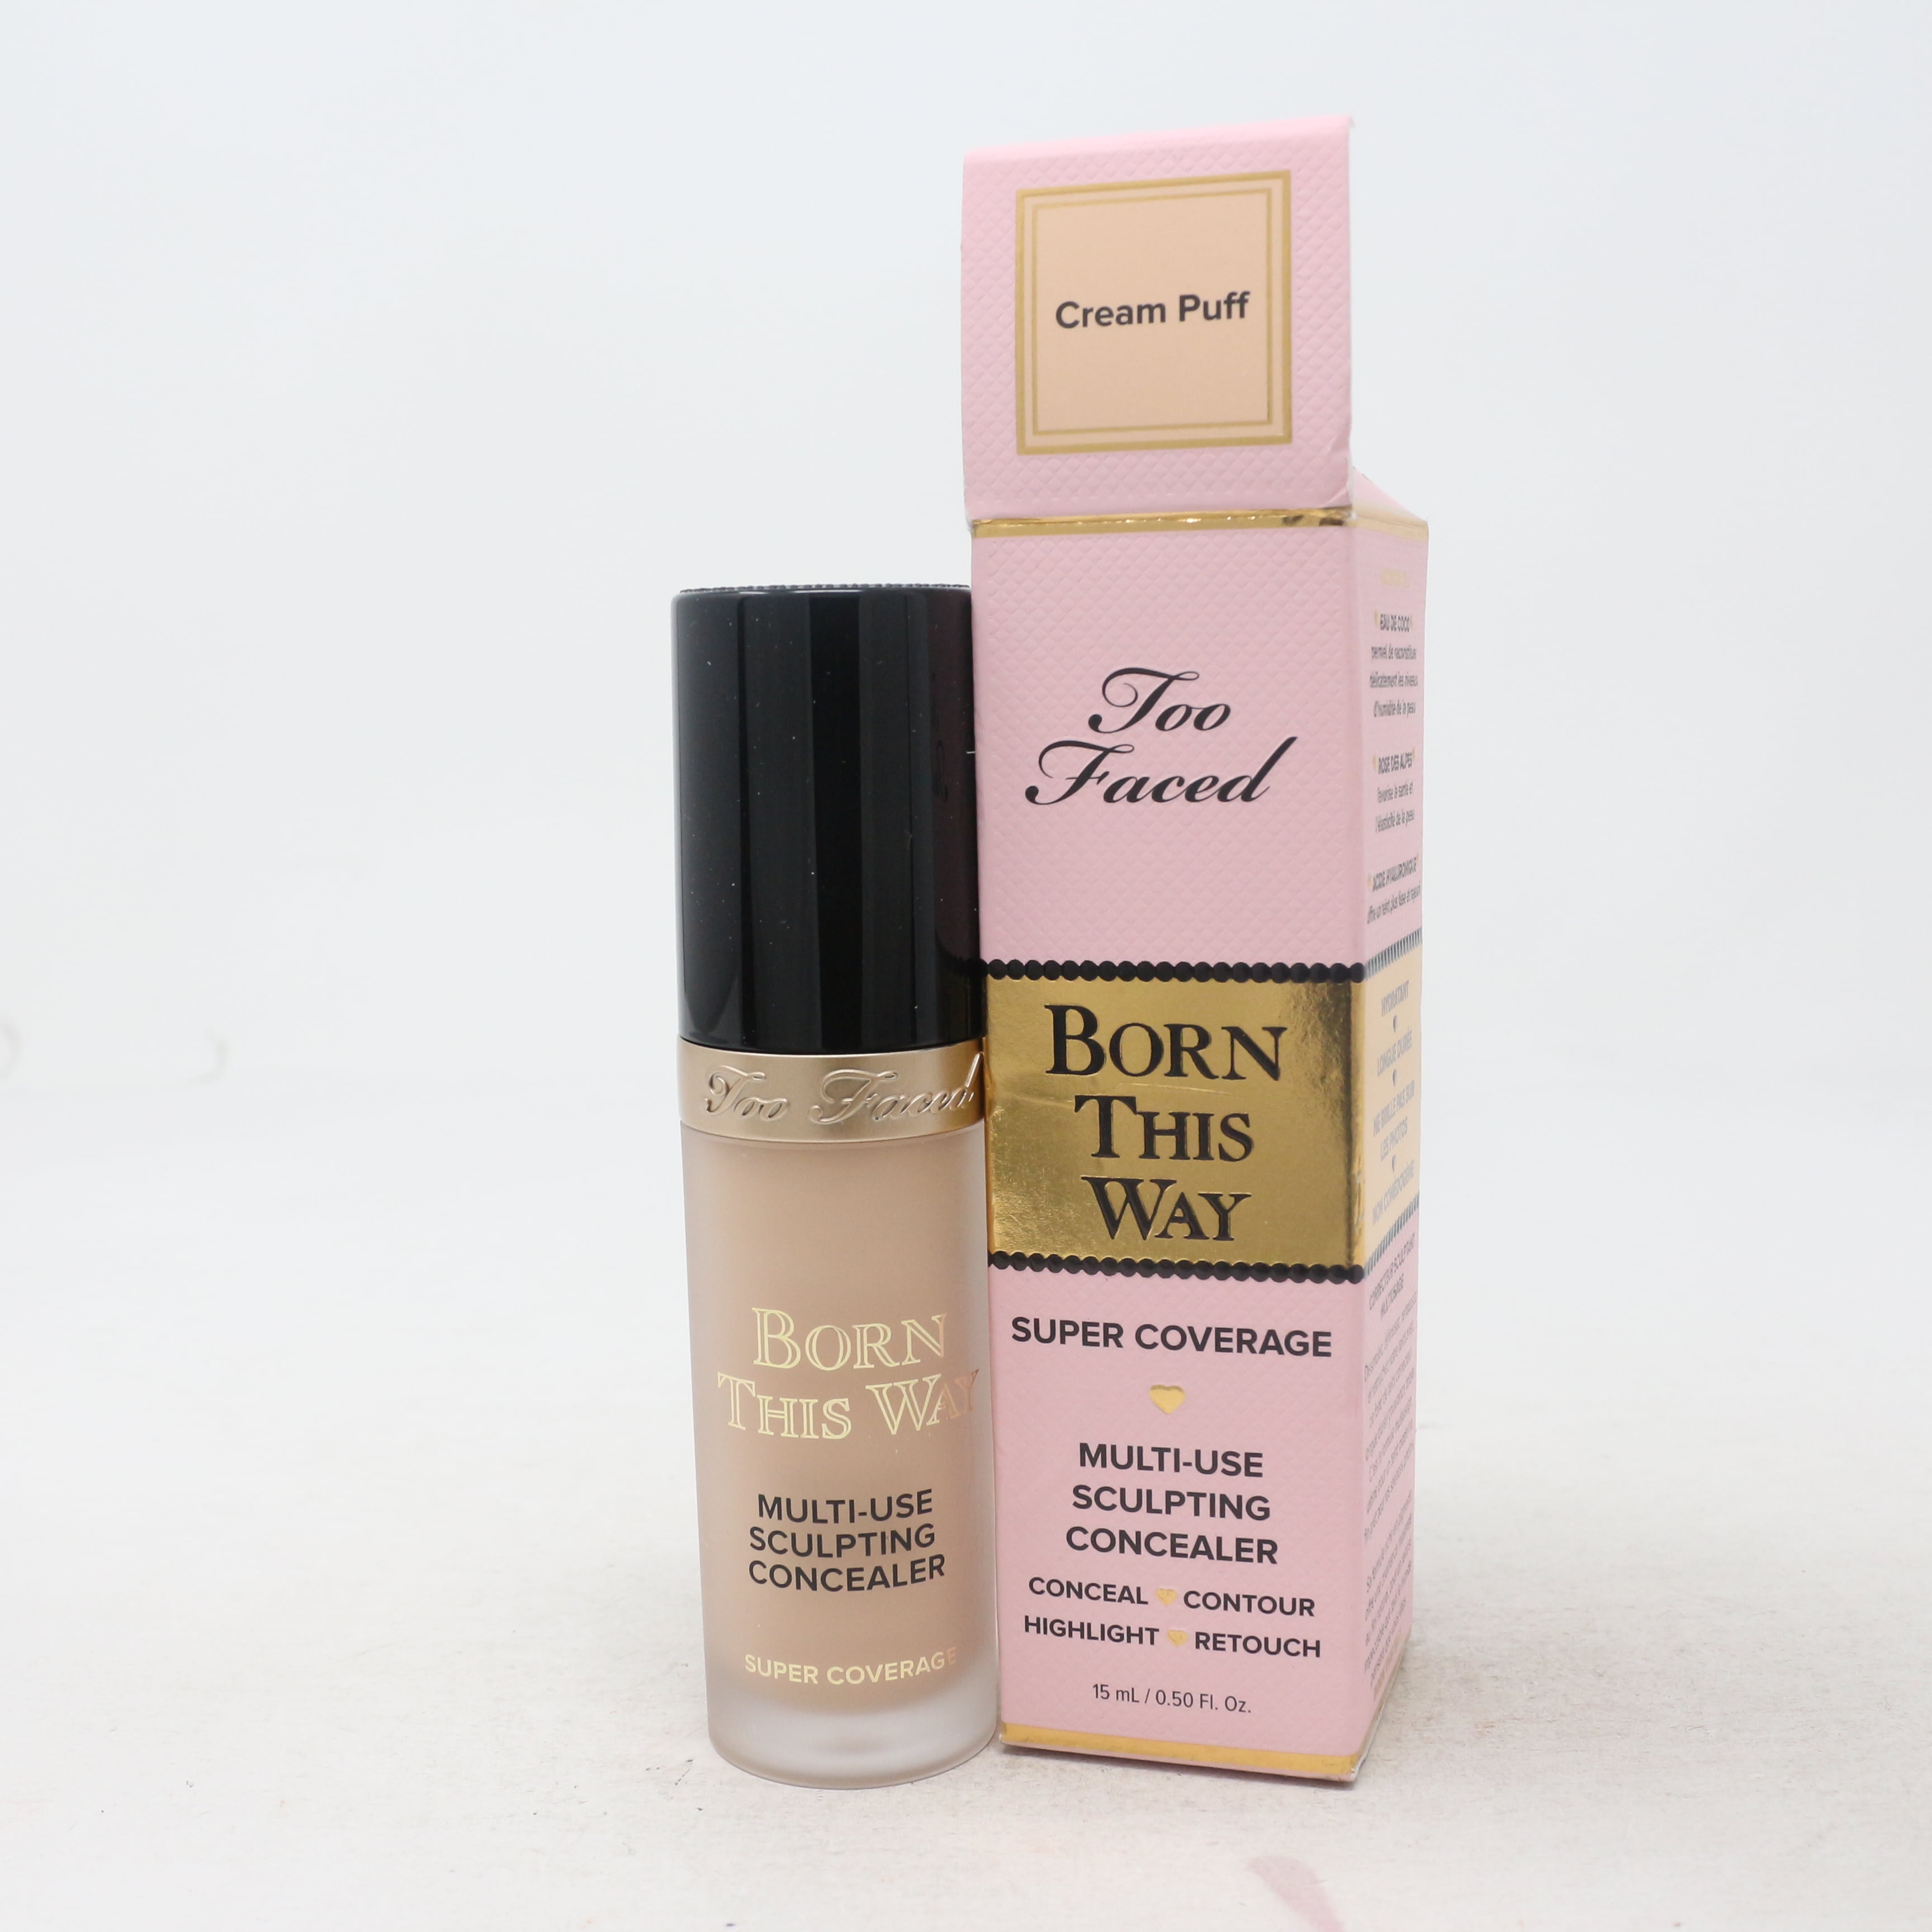 Too Faced Born Way Super Coverage Concealer 0.5oz/15ml New With Box - Walmart.com